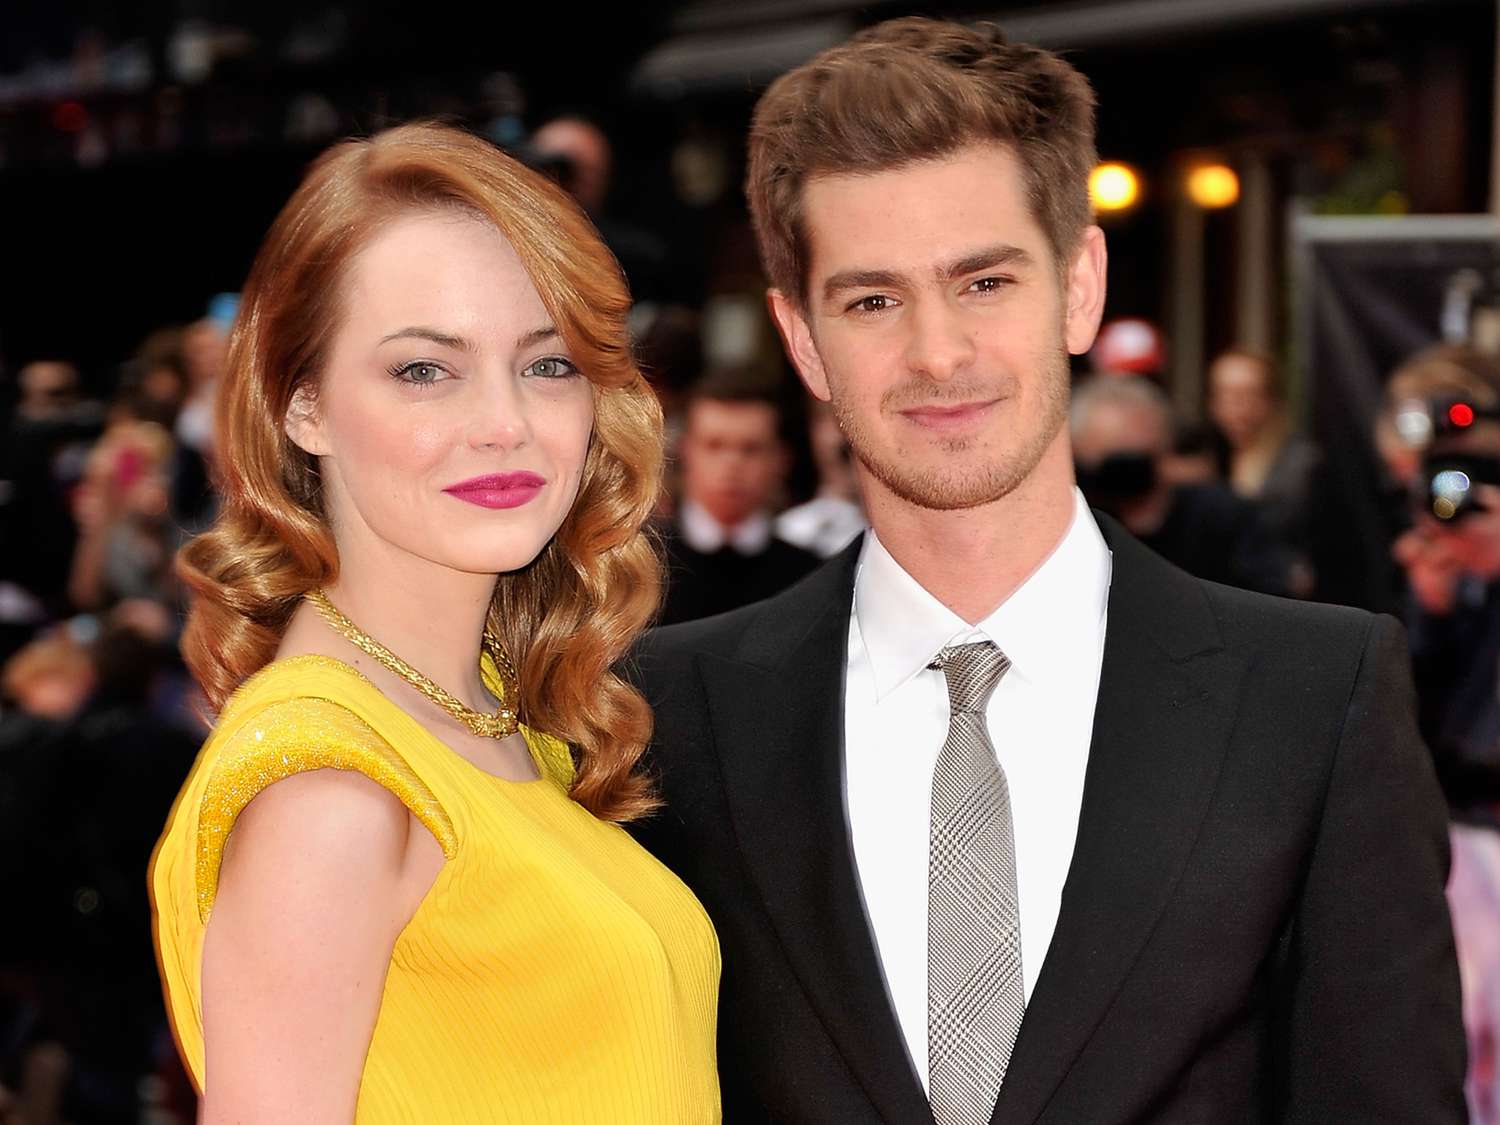  Emma Stone and Andrew Garfield's Relationship: A Look Back 